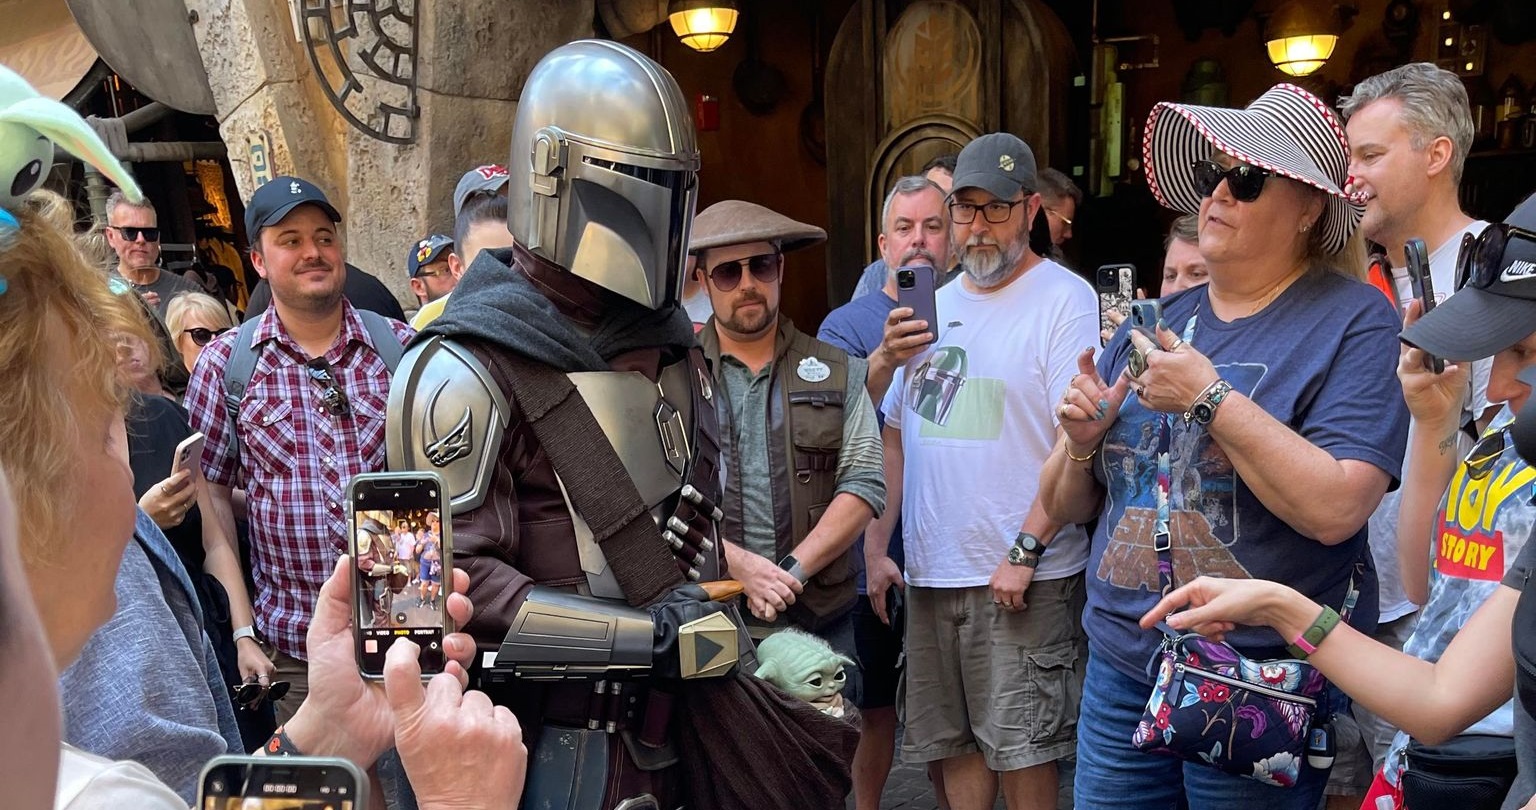 The Mandalorian and Grogu to Continue Making Regular Appearances at Galaxy’s Edge in Walt Disney World